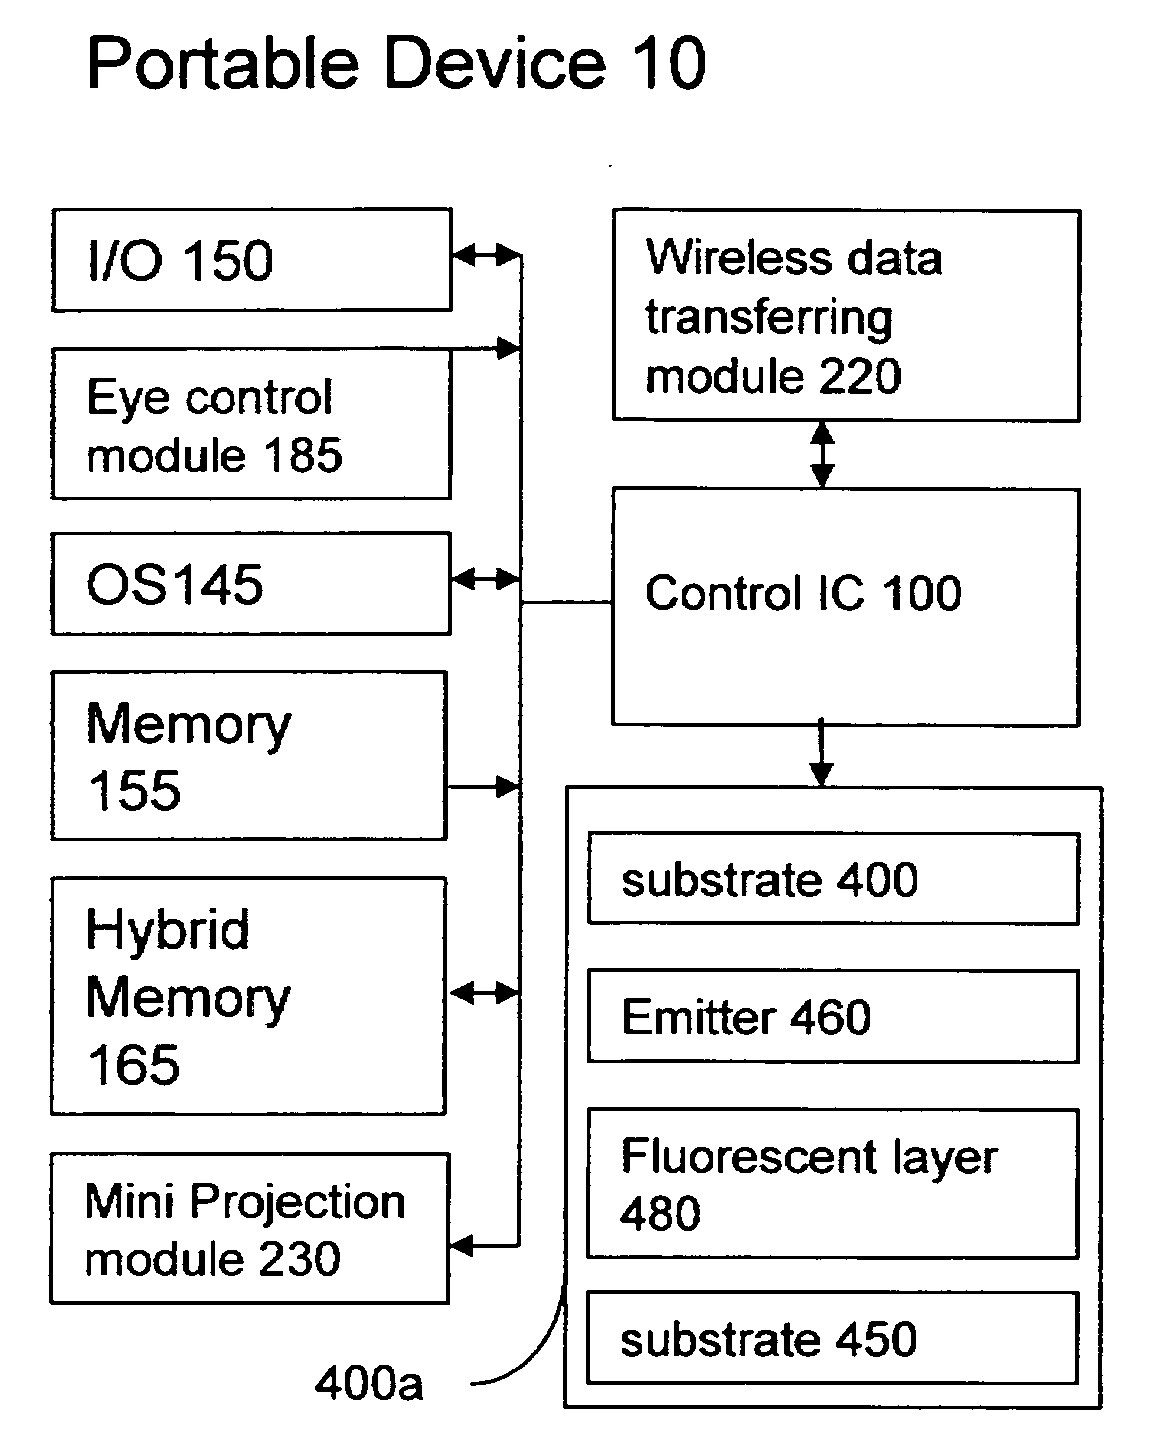 Advanced computing device with hybrid memory and eye control module